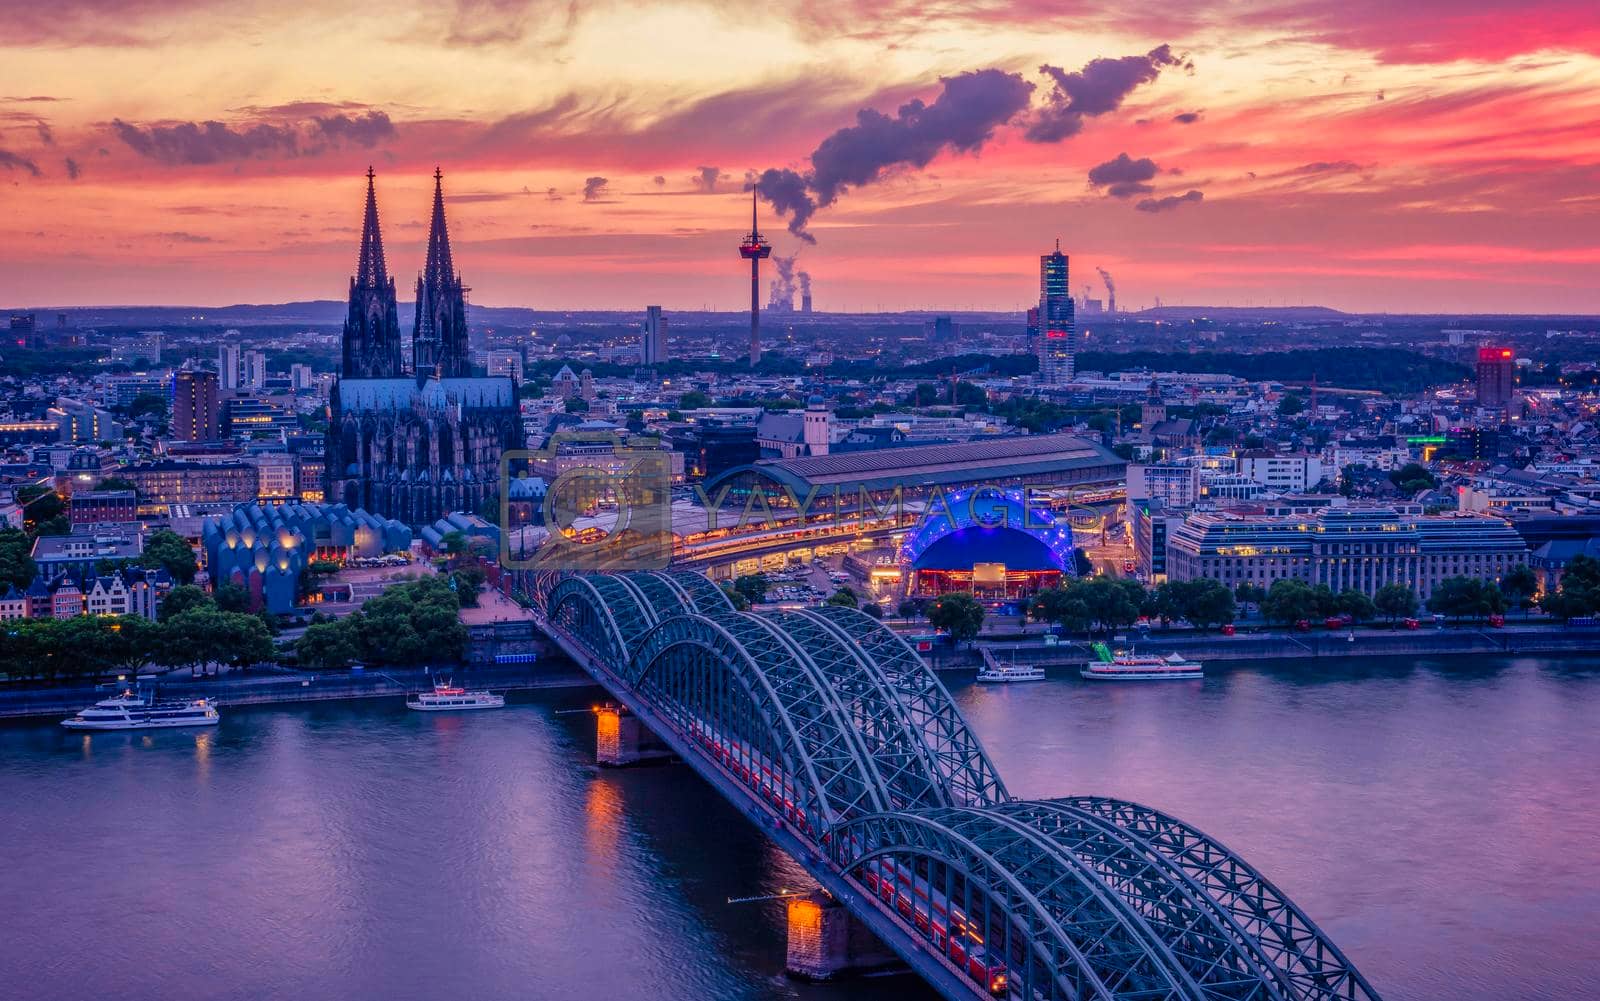 Royalty free image of Cologne Koln Germany during sunset, Cologne bridge with cathedral by fokkebok